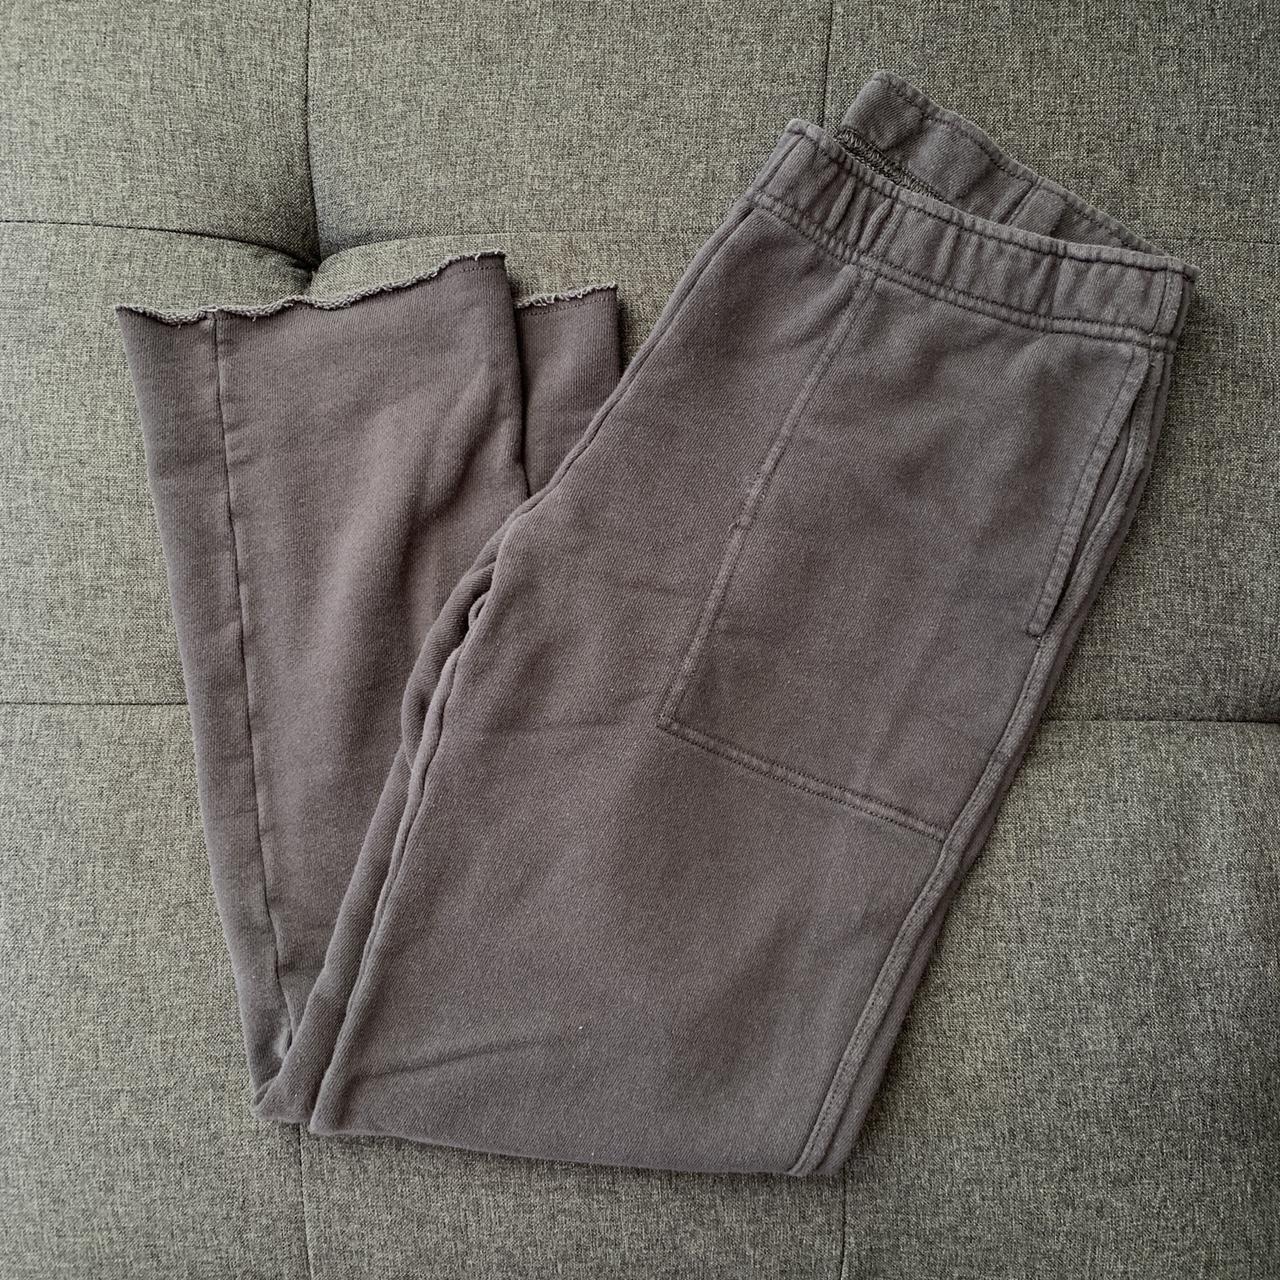 Aerie Women's Grey Joggers-tracksuits | Depop